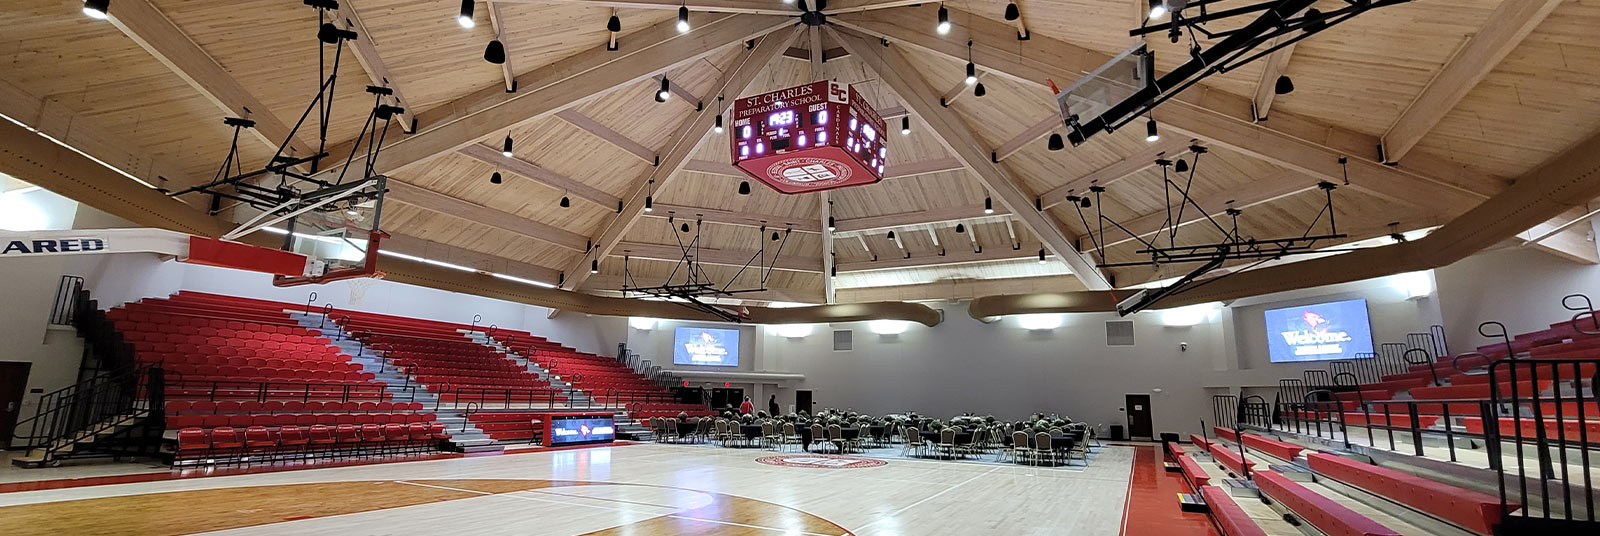 The interior of the new St. Charles Convocation Center.